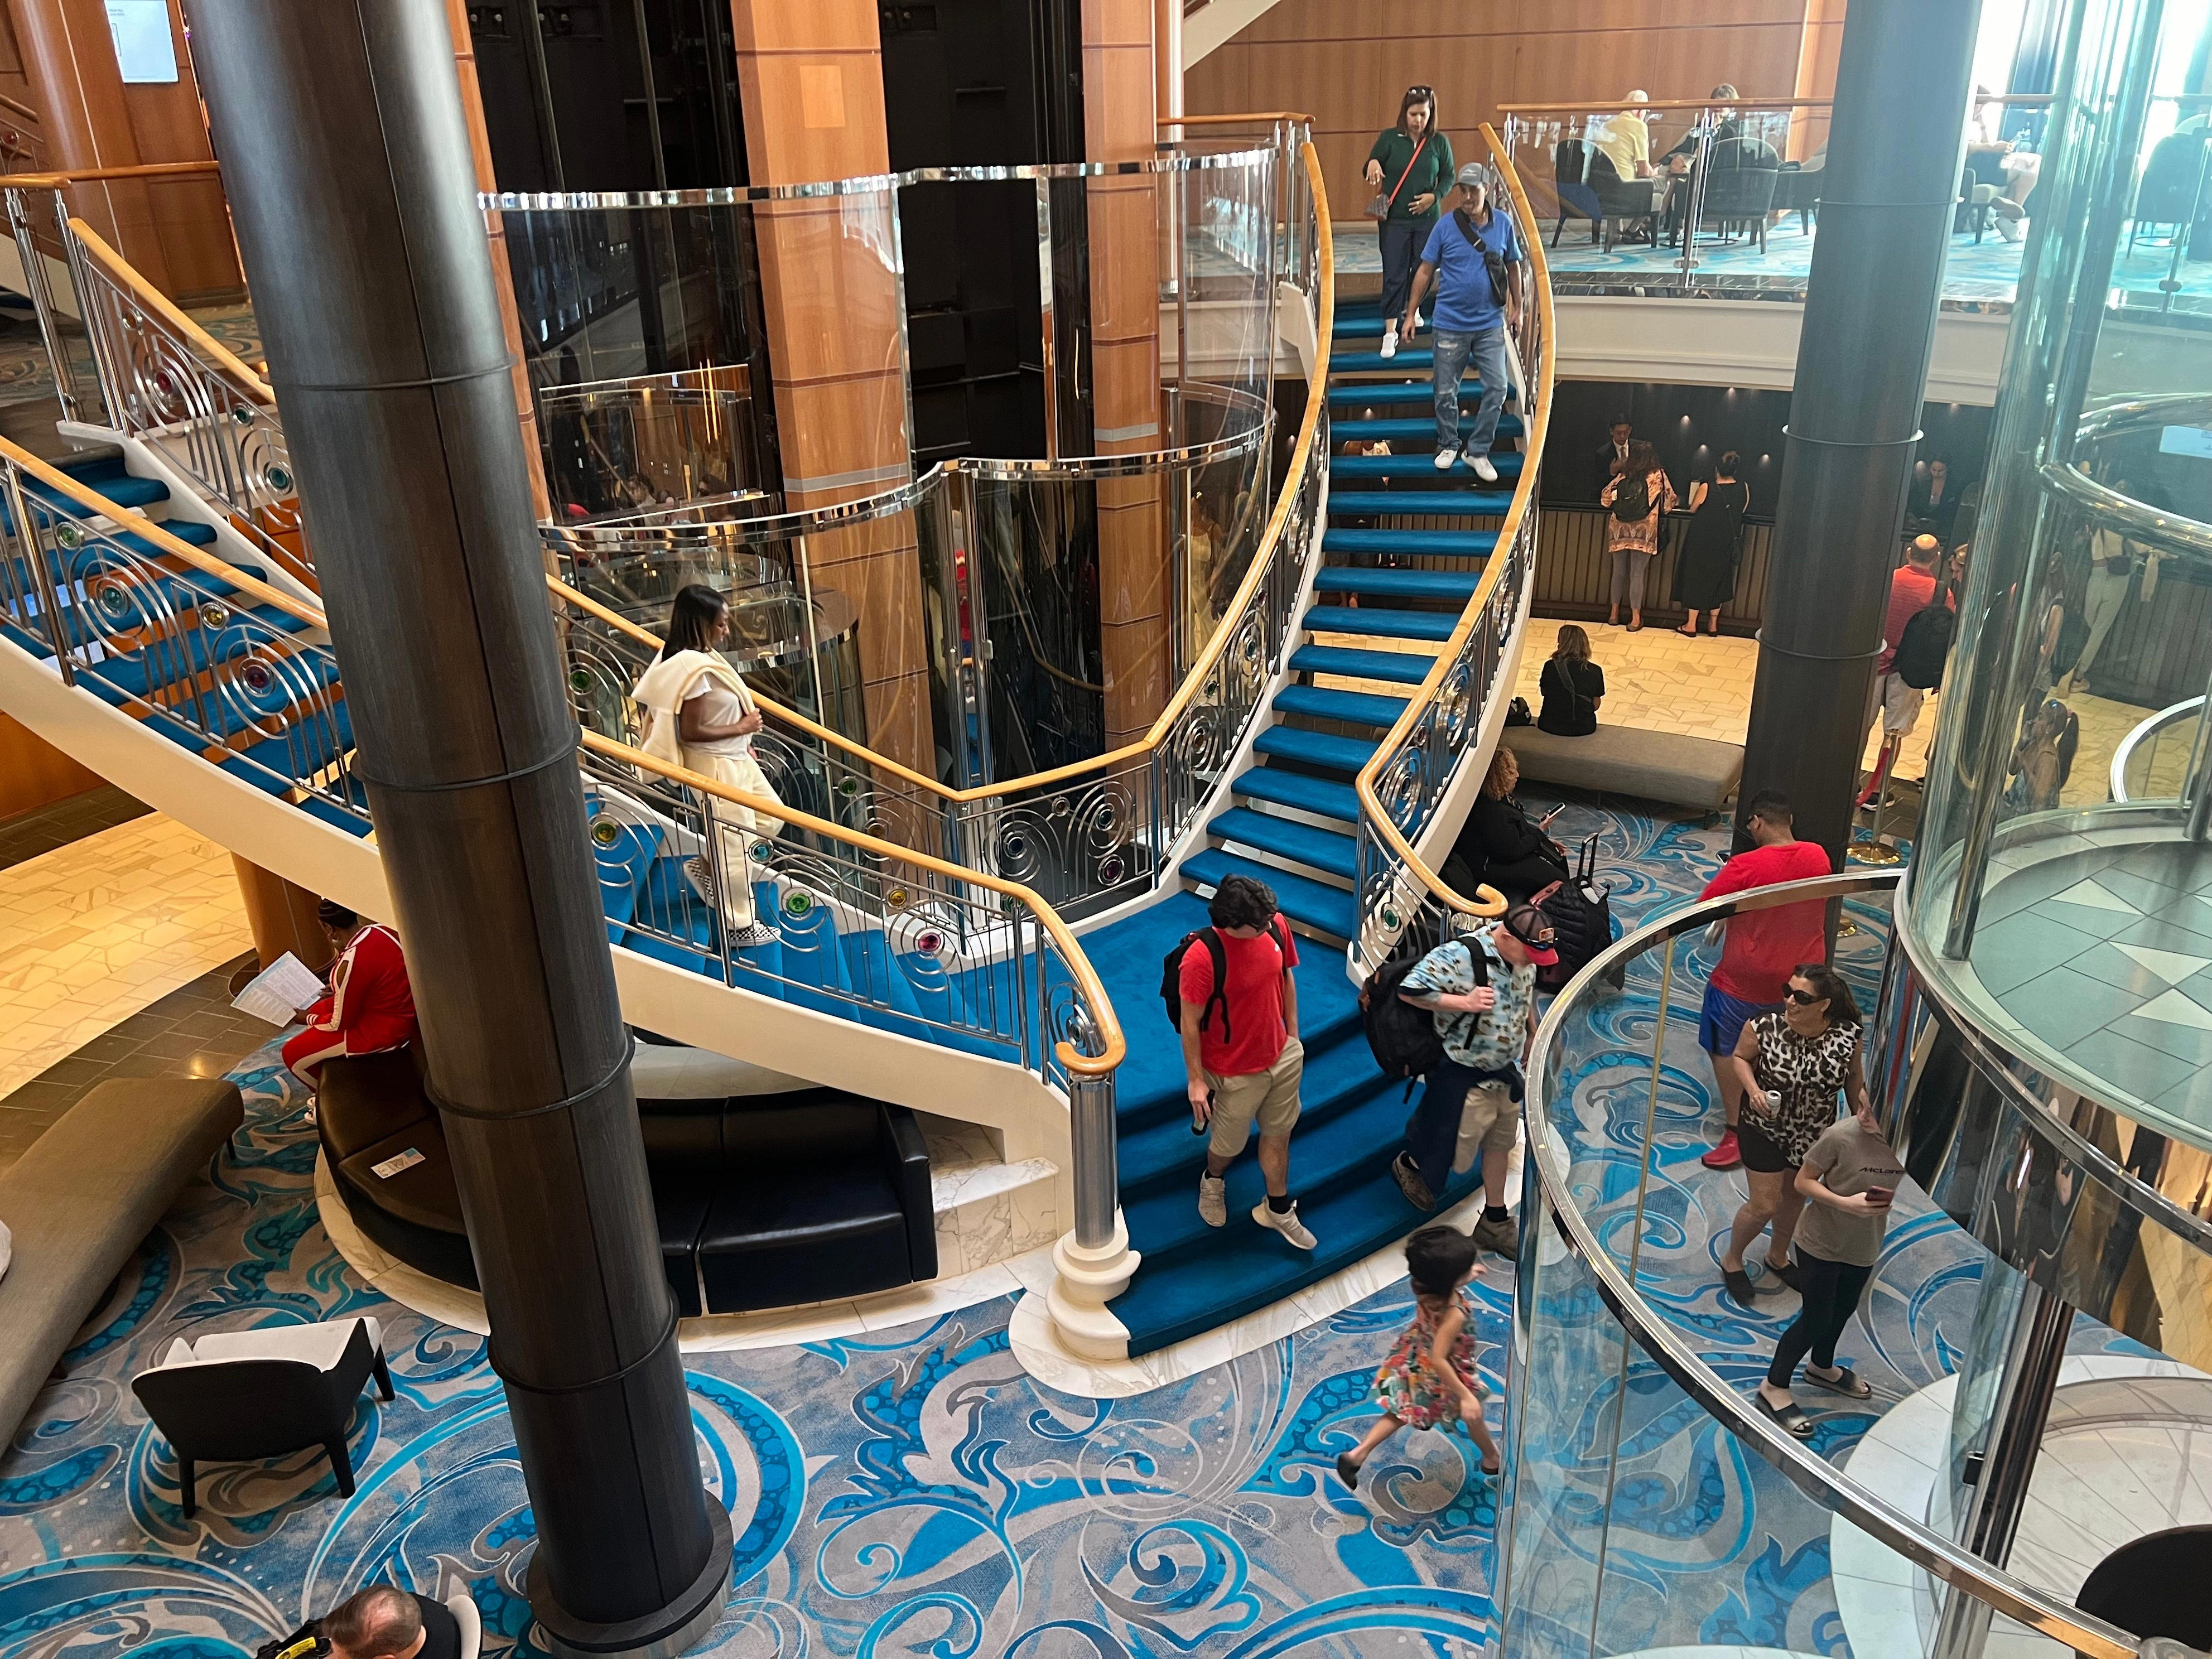 <p>The NCL Sky is small, so the lounges and social spaces are not as grandiose as other ships.</p><p>The lobby on the Sky is particularly tiny, which is the only area I found annoyingly crowded.</p>